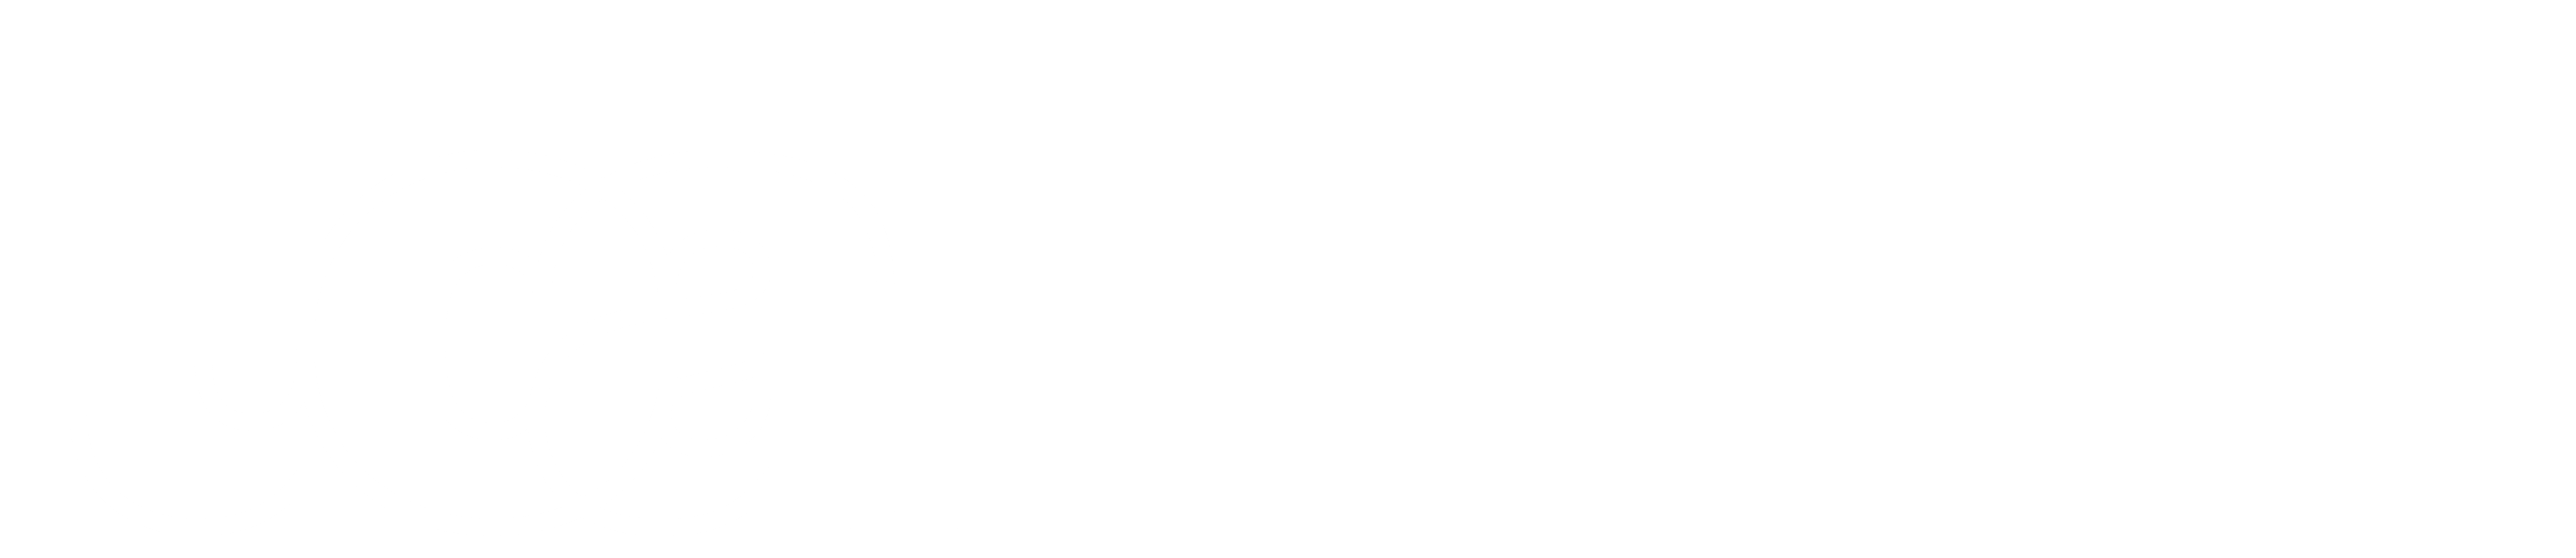 UCAL Connect